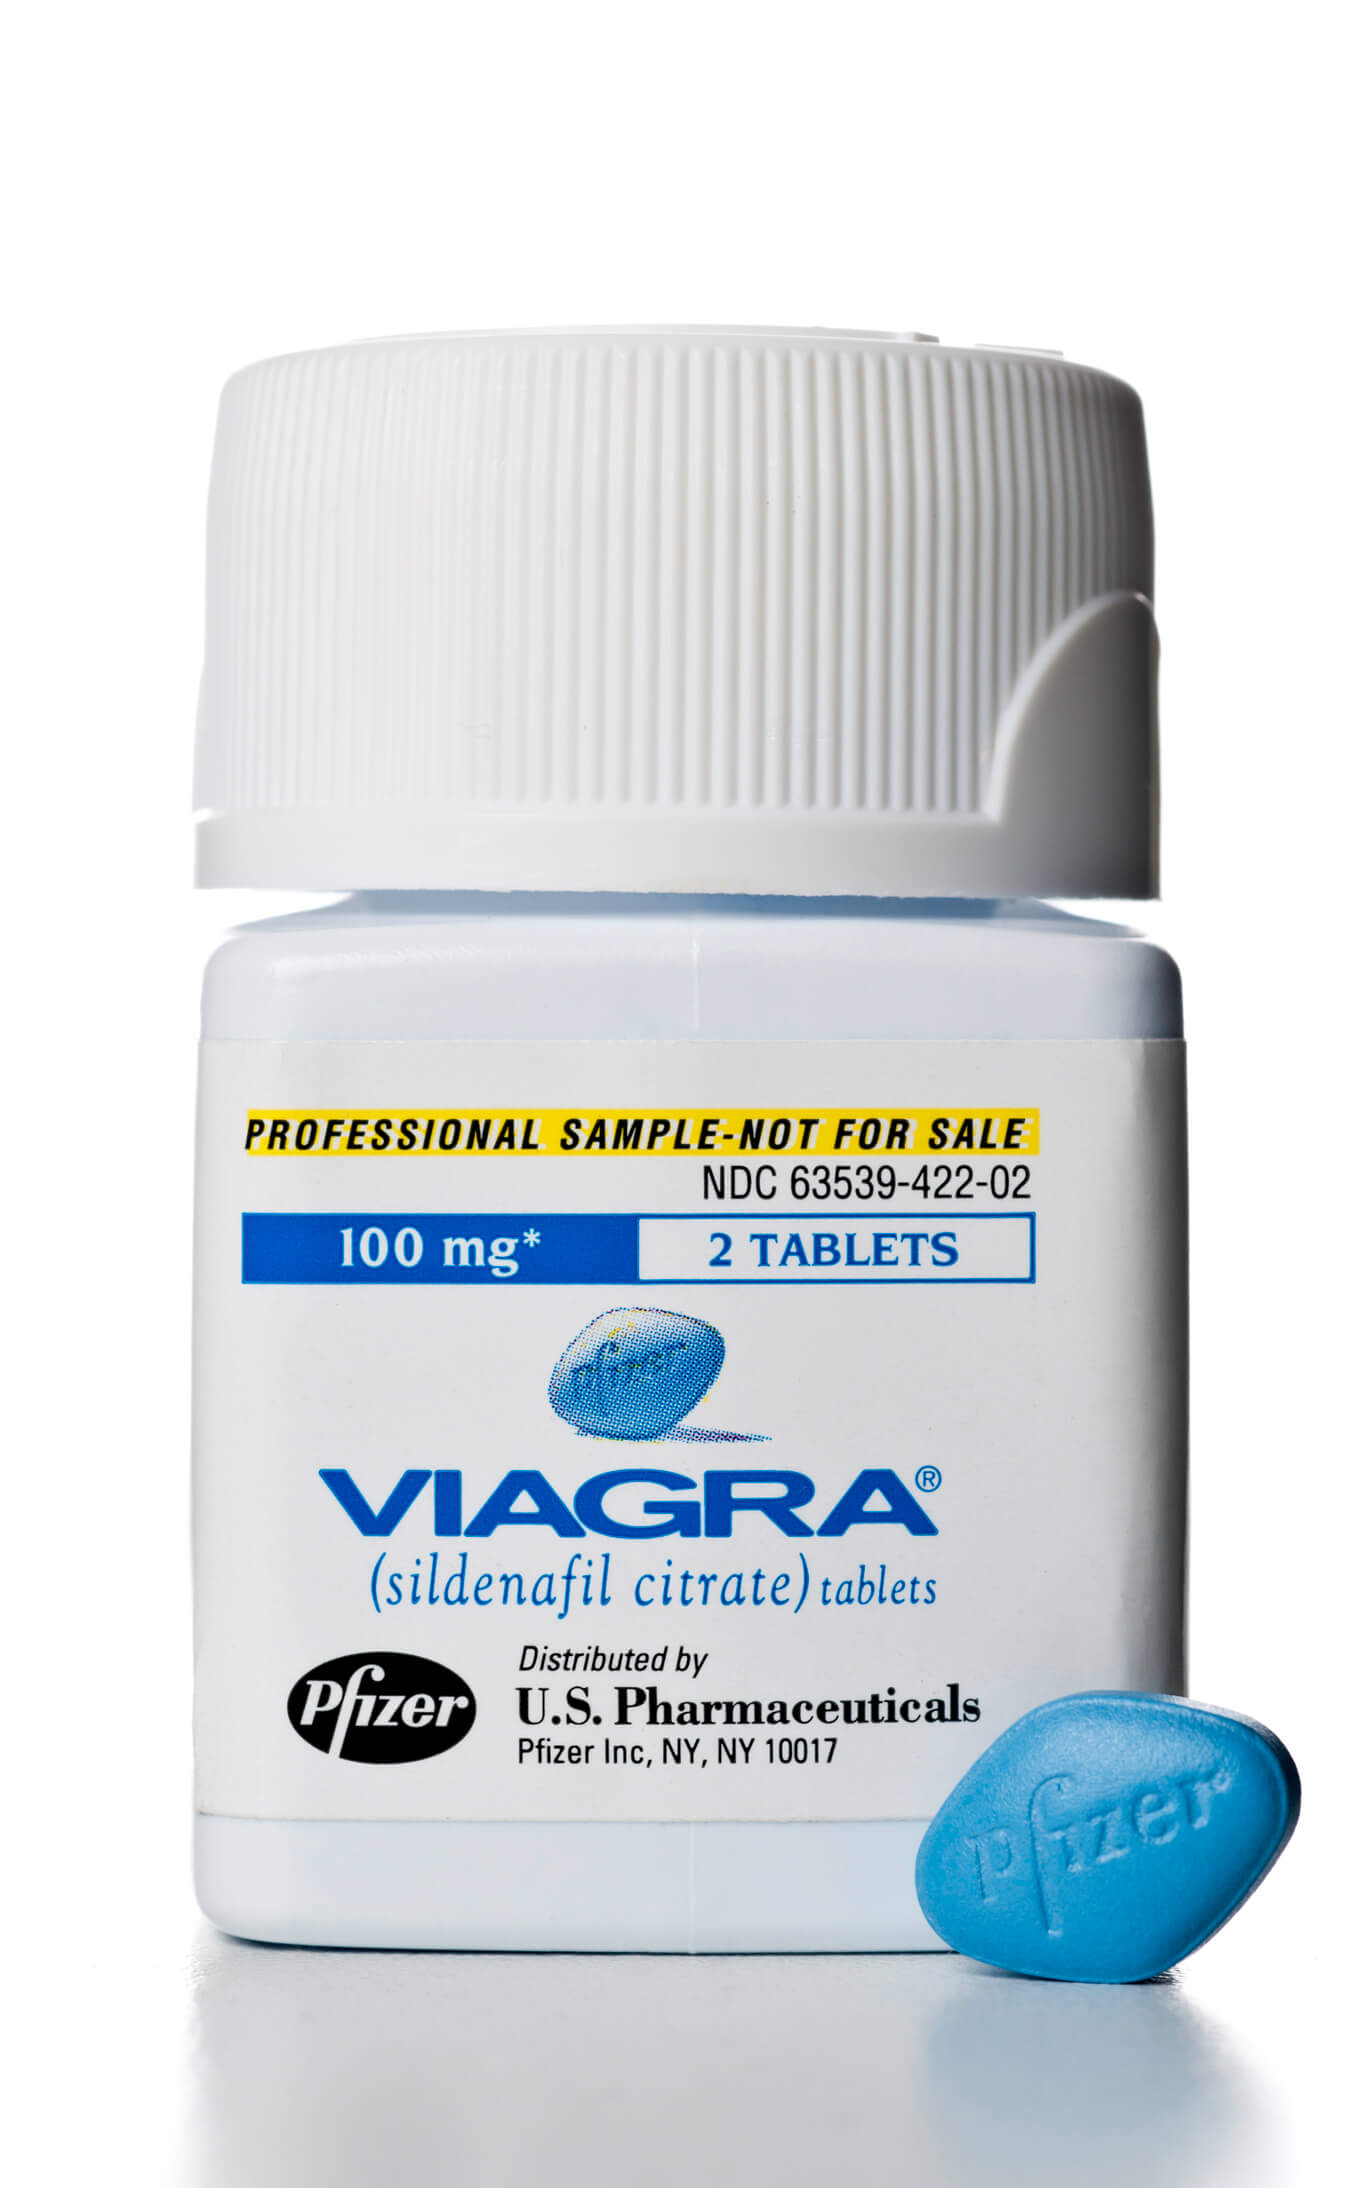 Can Viagra and Other Drugs Help Me? - Desiderio Avila Jr., MD